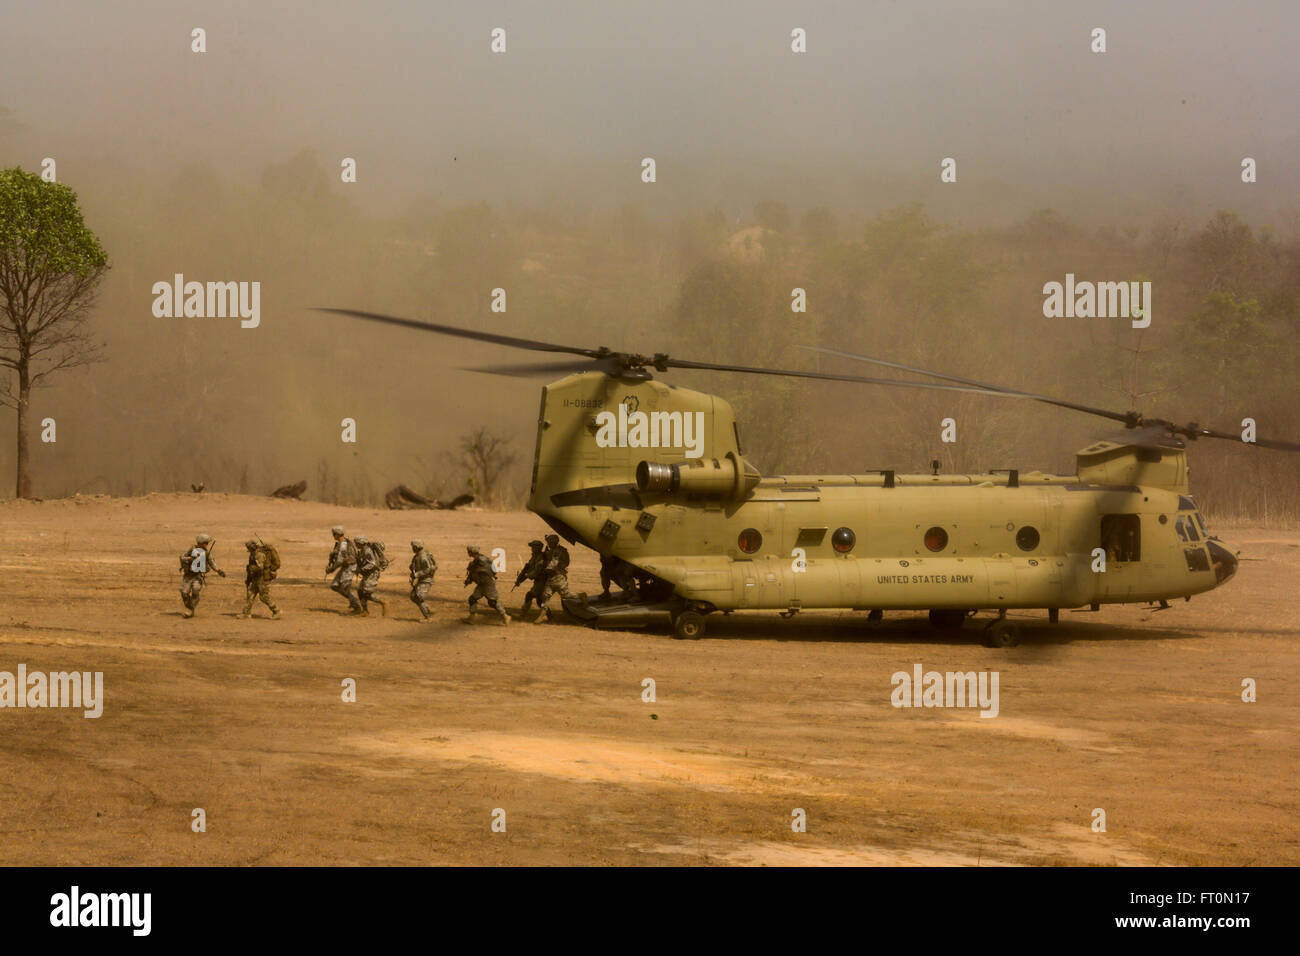 A U.S. Army CH-47 Chinook is used to transport Soldiers during a combined arms live fire exercise at Ban Chan Khrem, Thailand, during exercise Cobra Gold, Feb. 19, 2016. Cobra Gold is a multinational training exercise developed to strengthen security and interoperability between the Kingdom of Thailand, the U.S. and other participating nations. (U.S. Marine Corps Combat Camera photo by Lance Cpl. Eryn L. Edelman/Released) Stock Photo